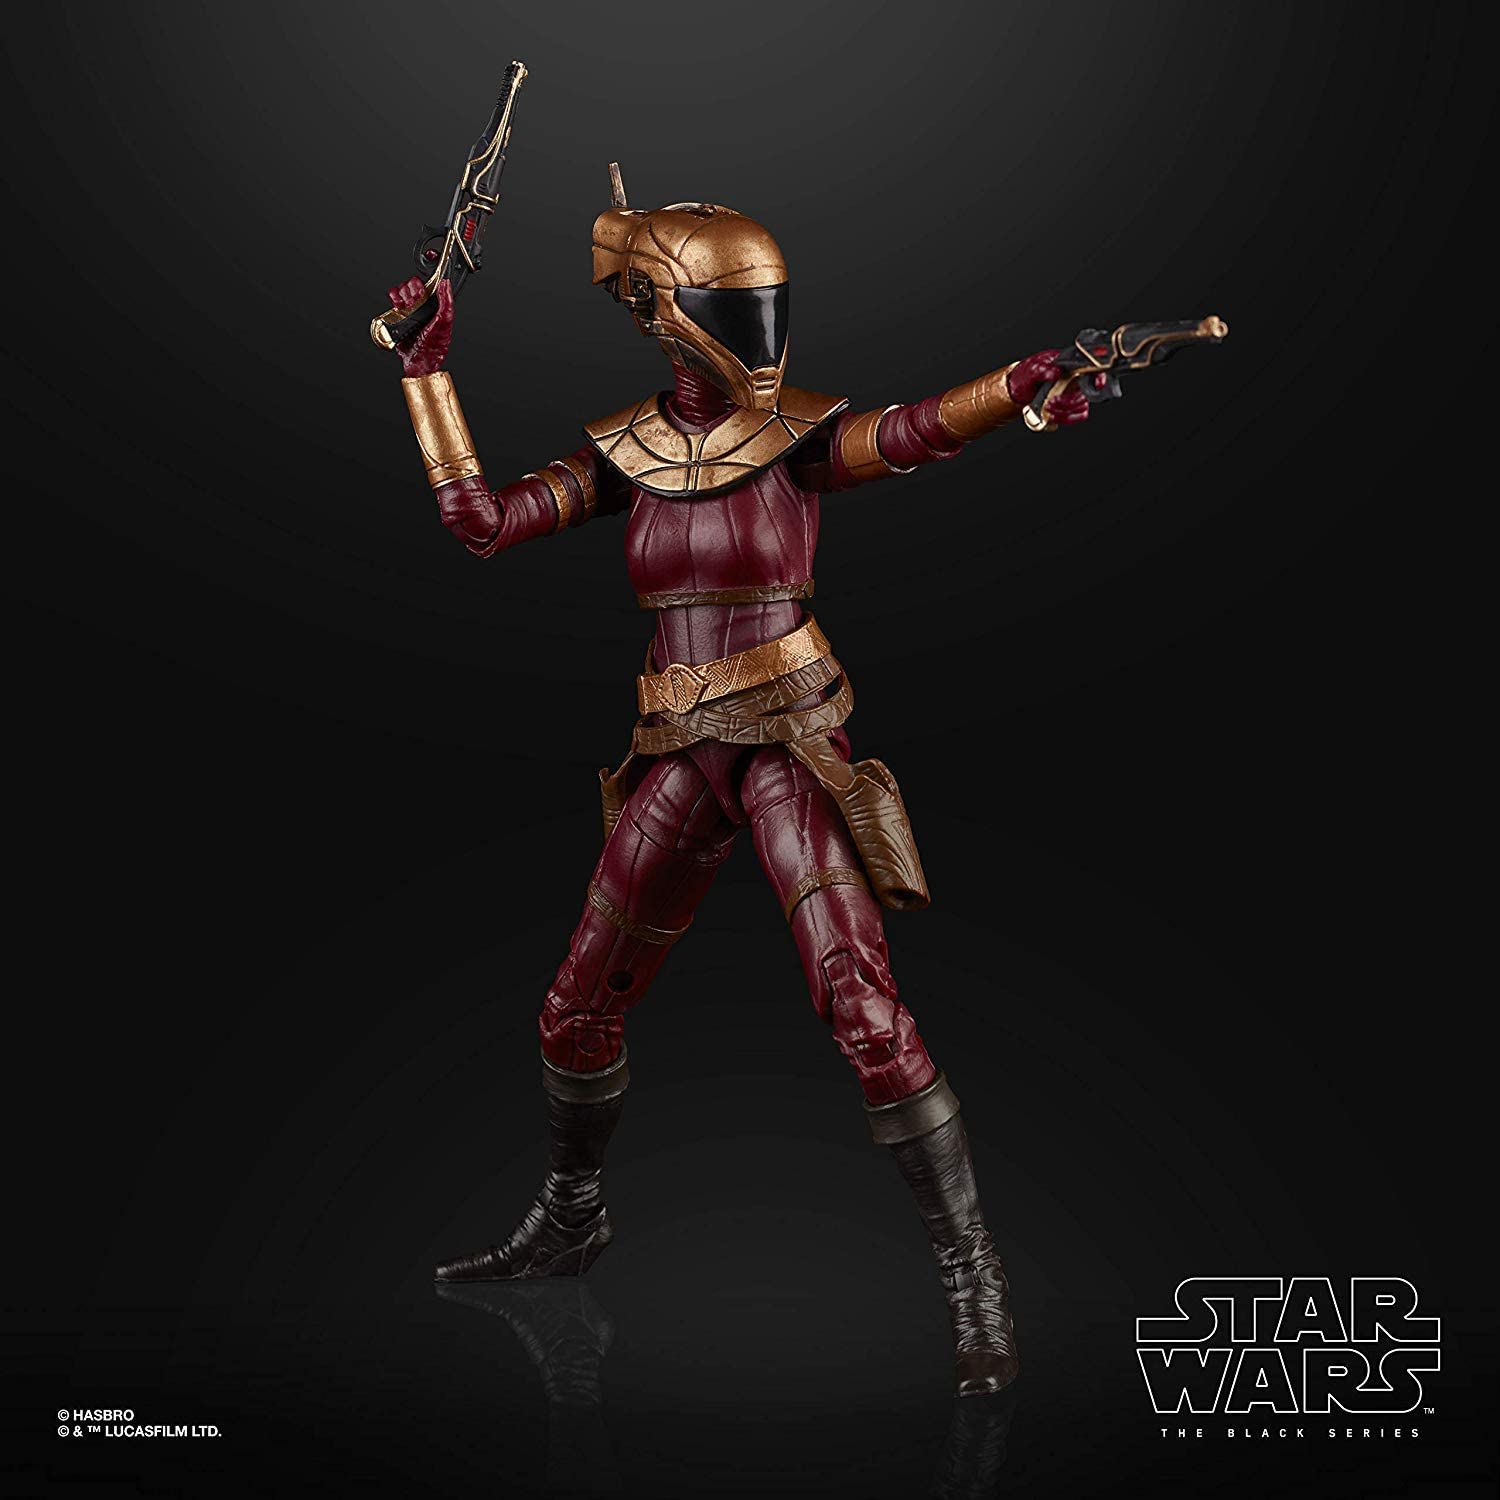 Star Wars: The Black Series - Zorii Bliss 6-Inch Action 